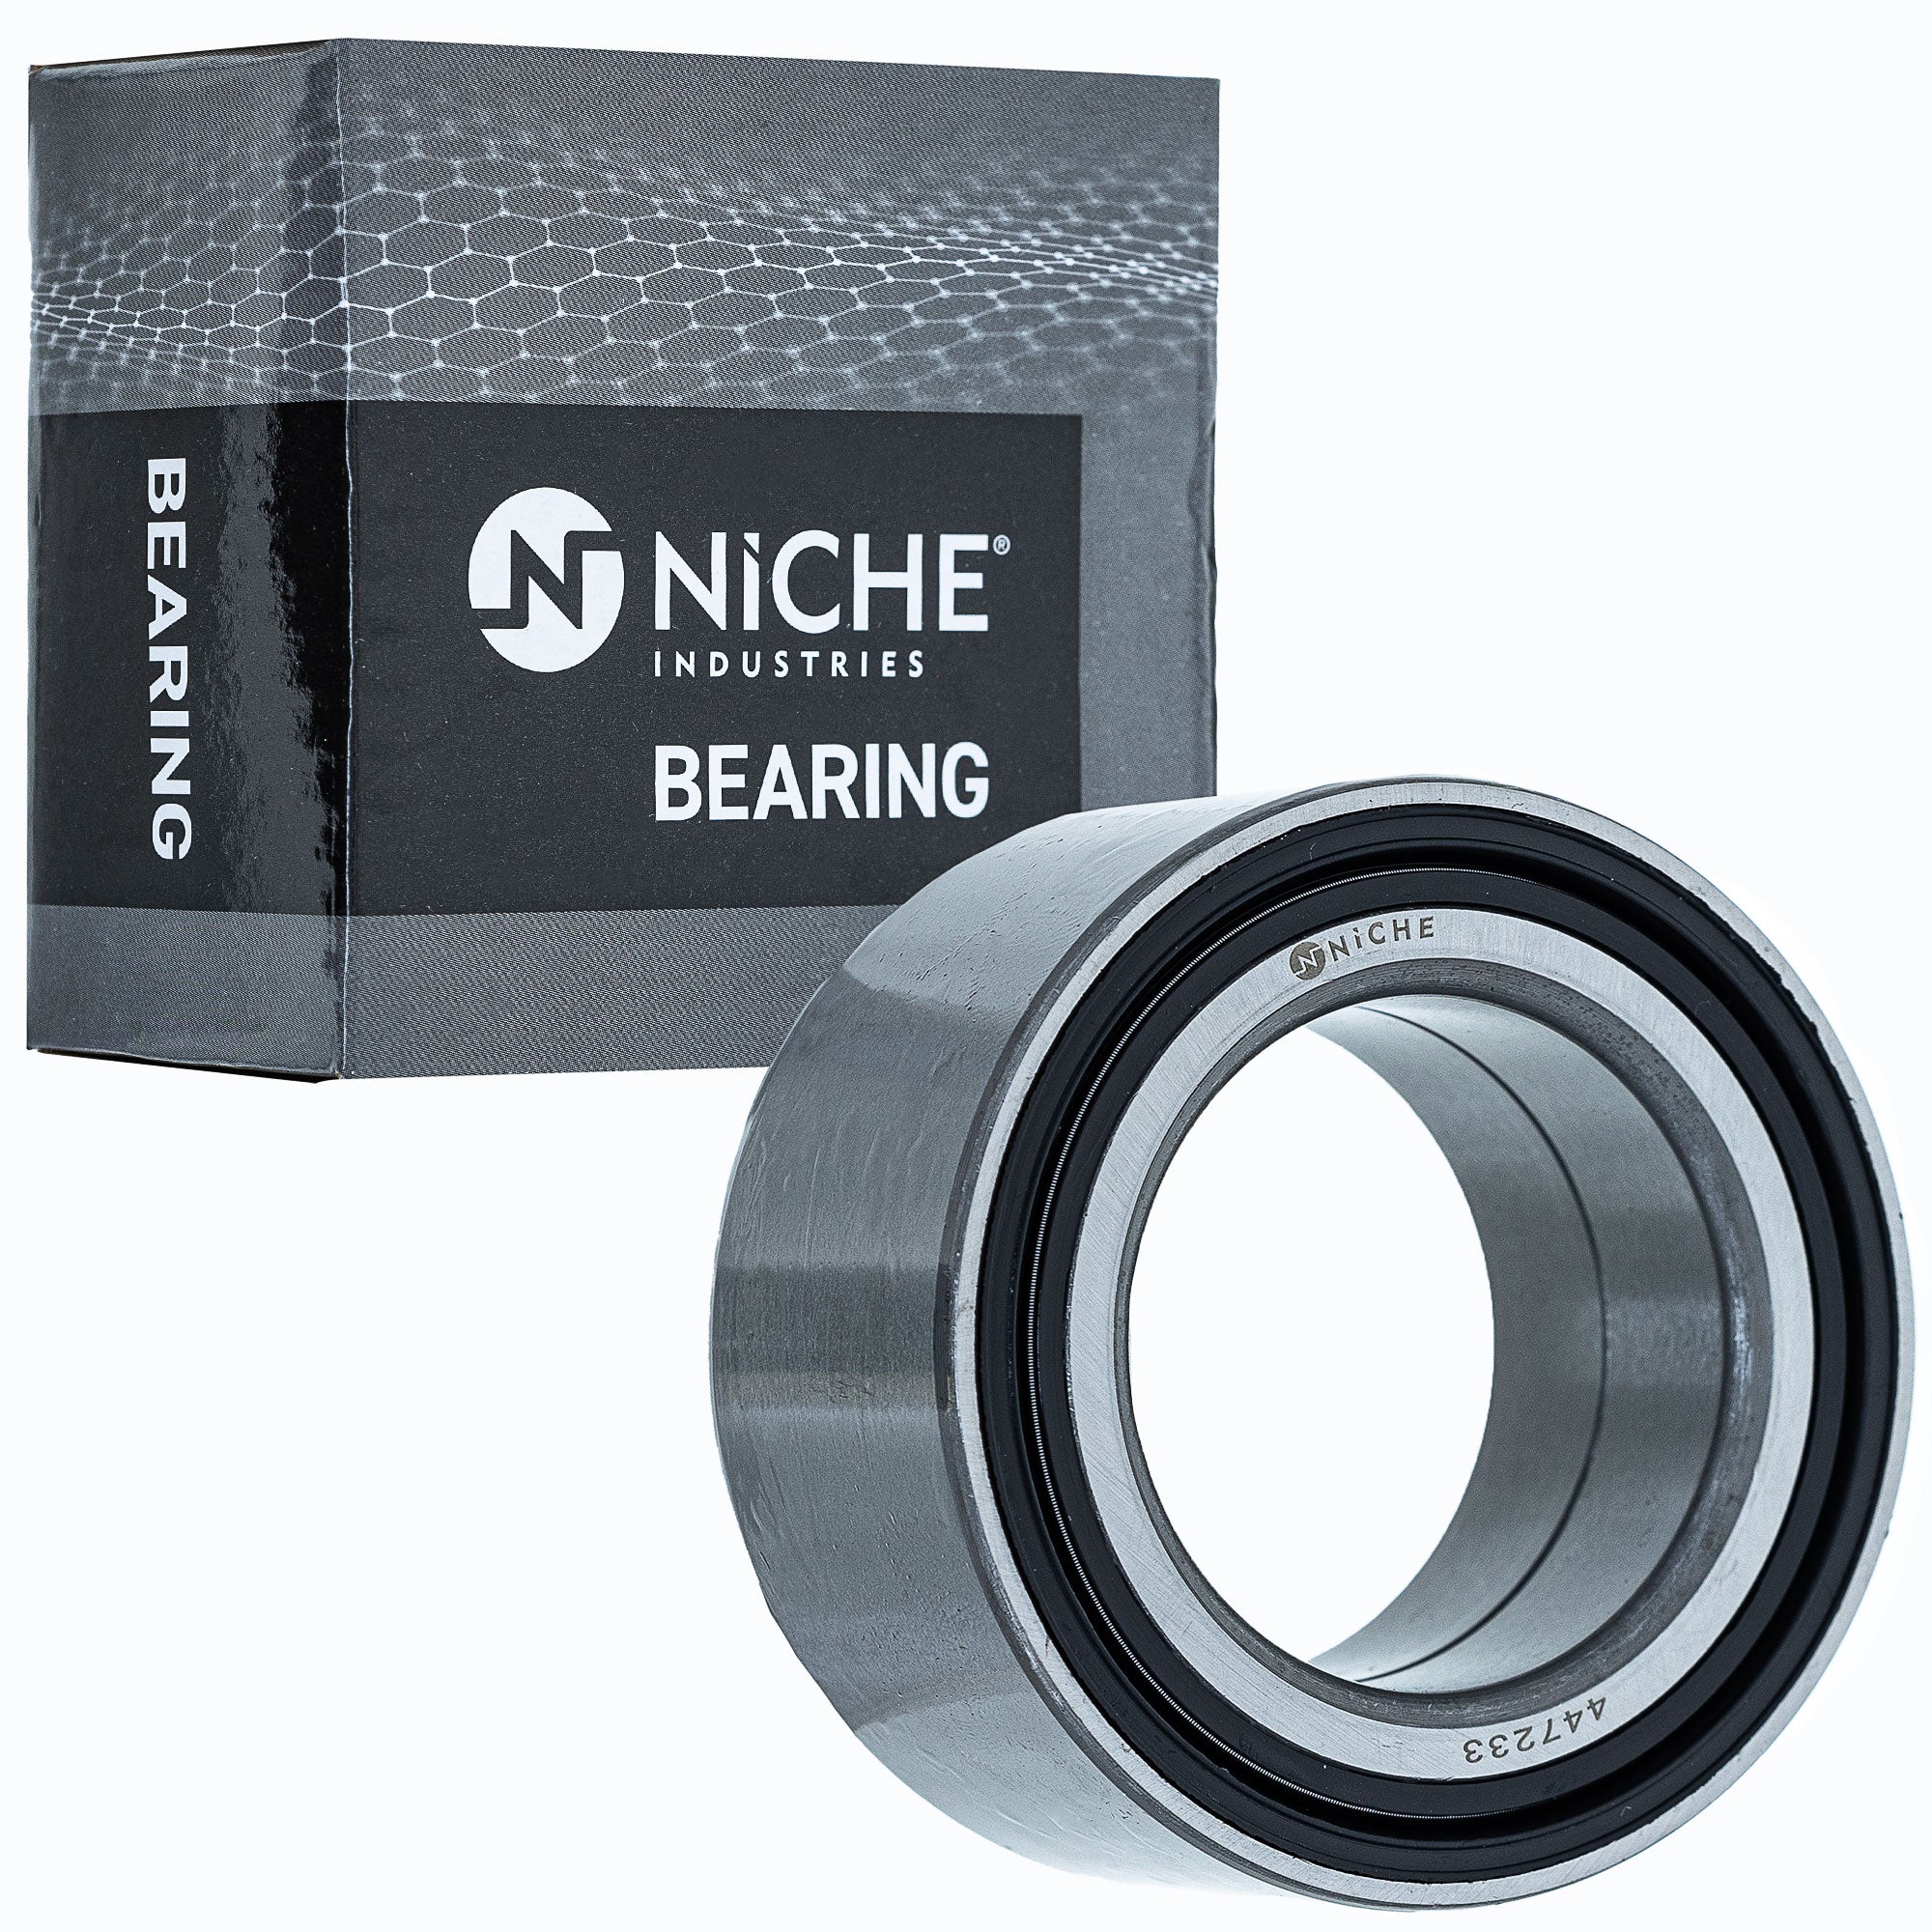 NICHE 519-CBB2239R Bearing 10-Pack for zOTHER Stateline Sabre